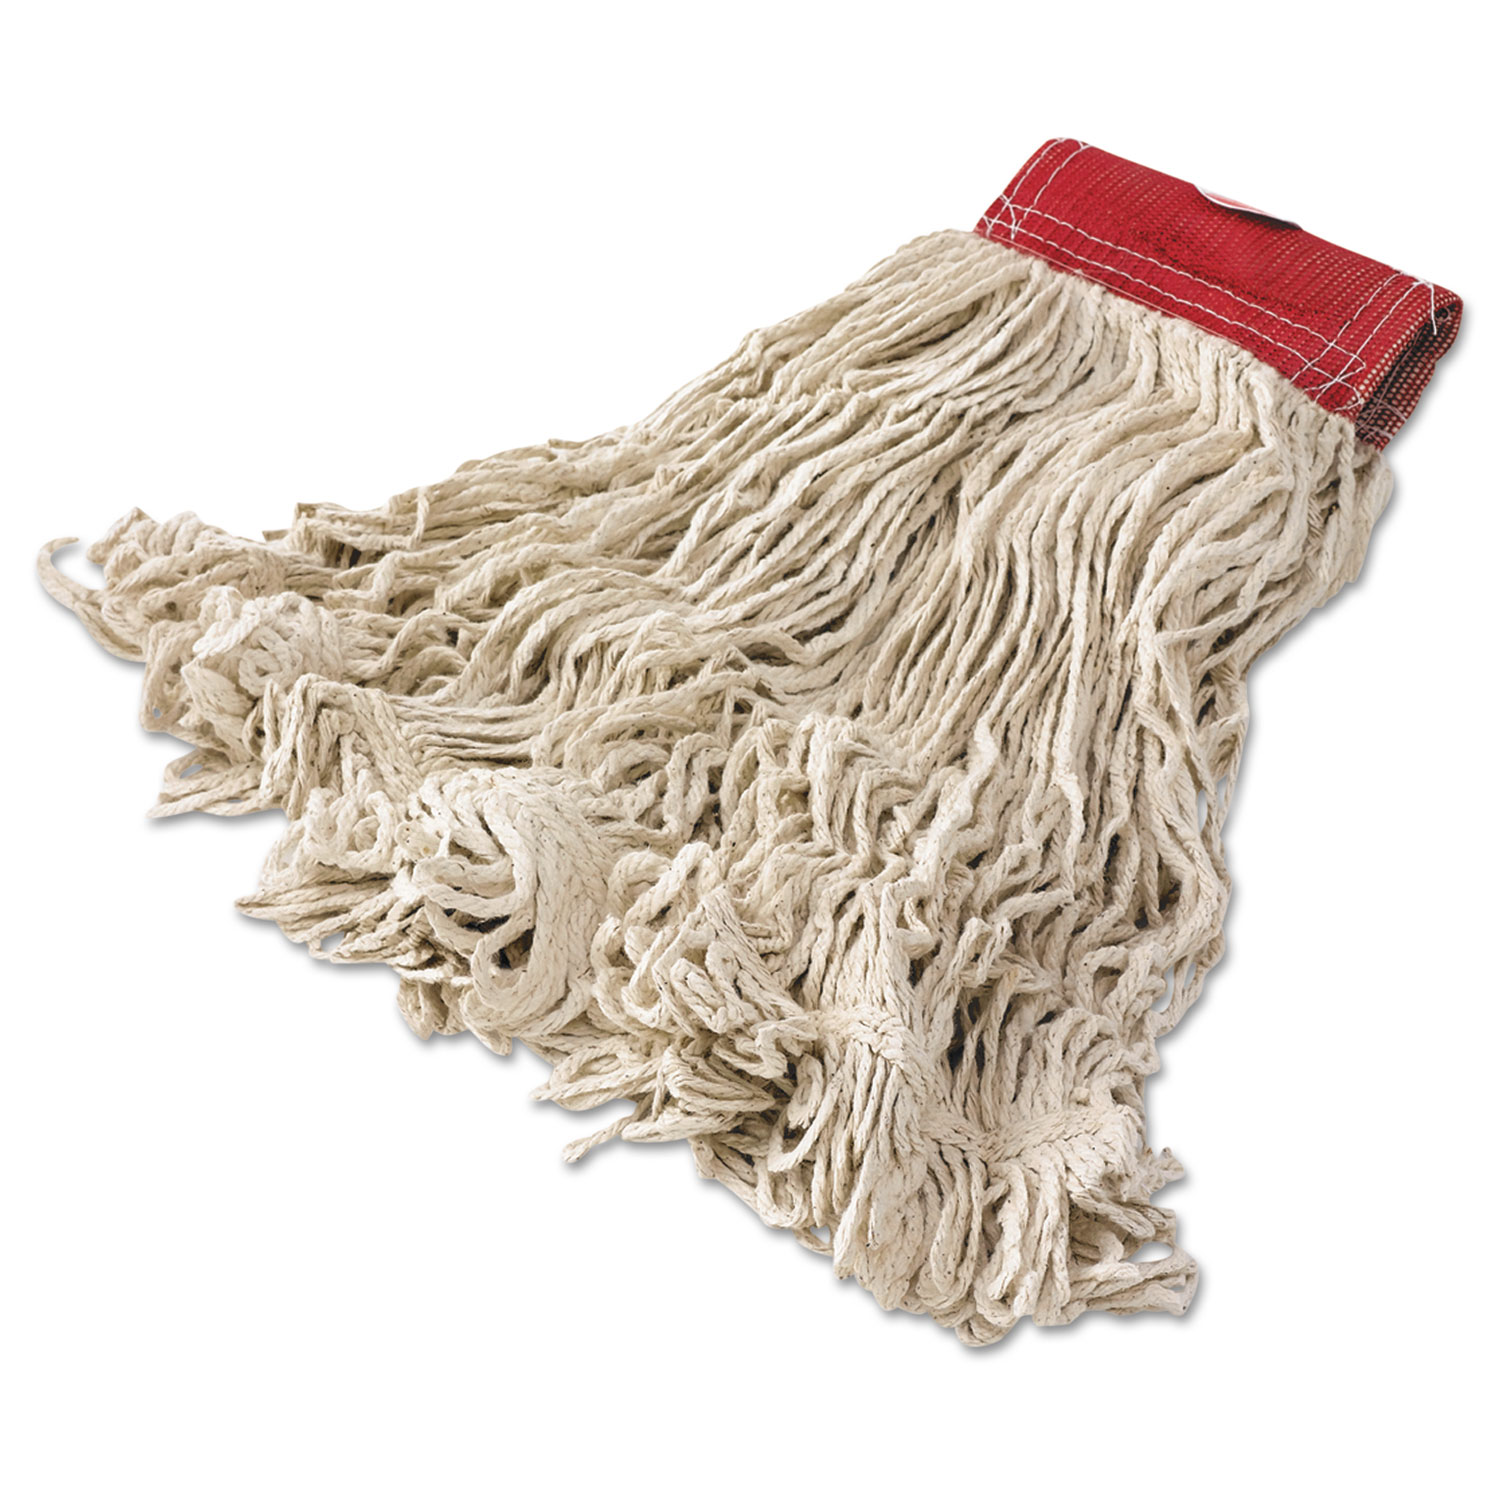  Rubbermaid Commercial FGD15306WH00 Super Stitch Cotton Looped End Wet Mop Head, Large, 5 Red Headband (RCPD153) 